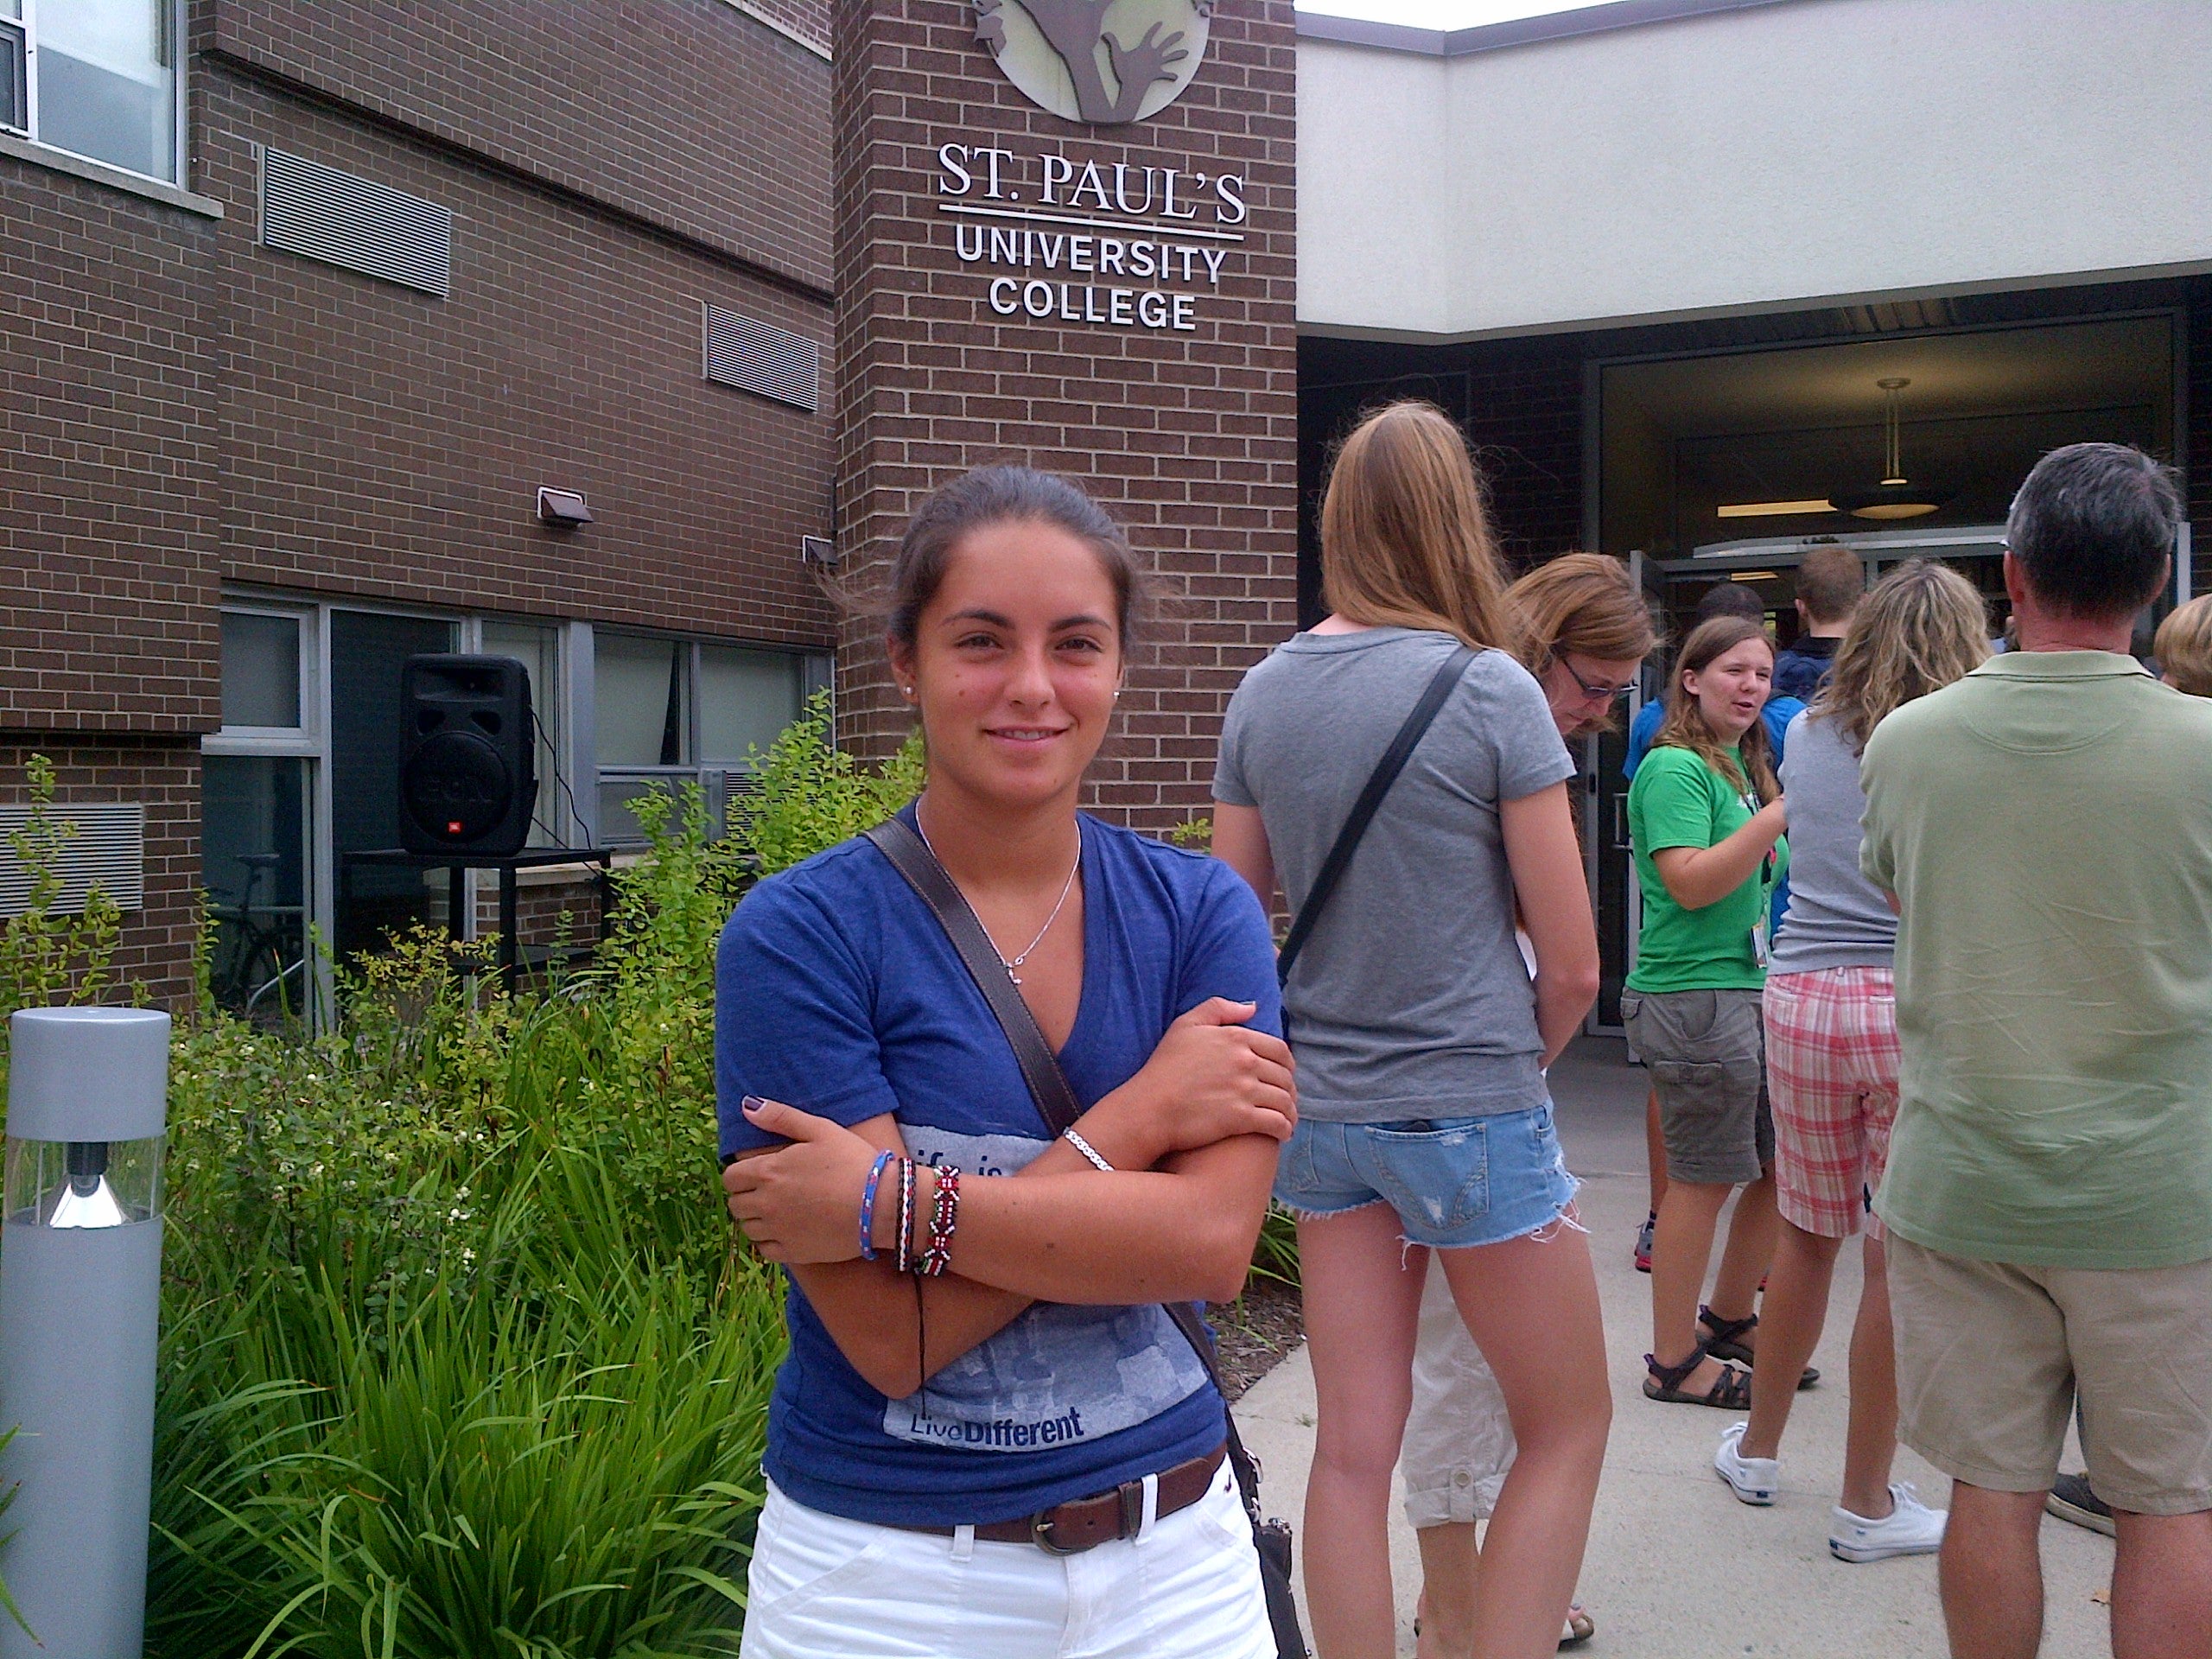 Alex Foto outside the main entrance to St. Paul's on move-in day 2013